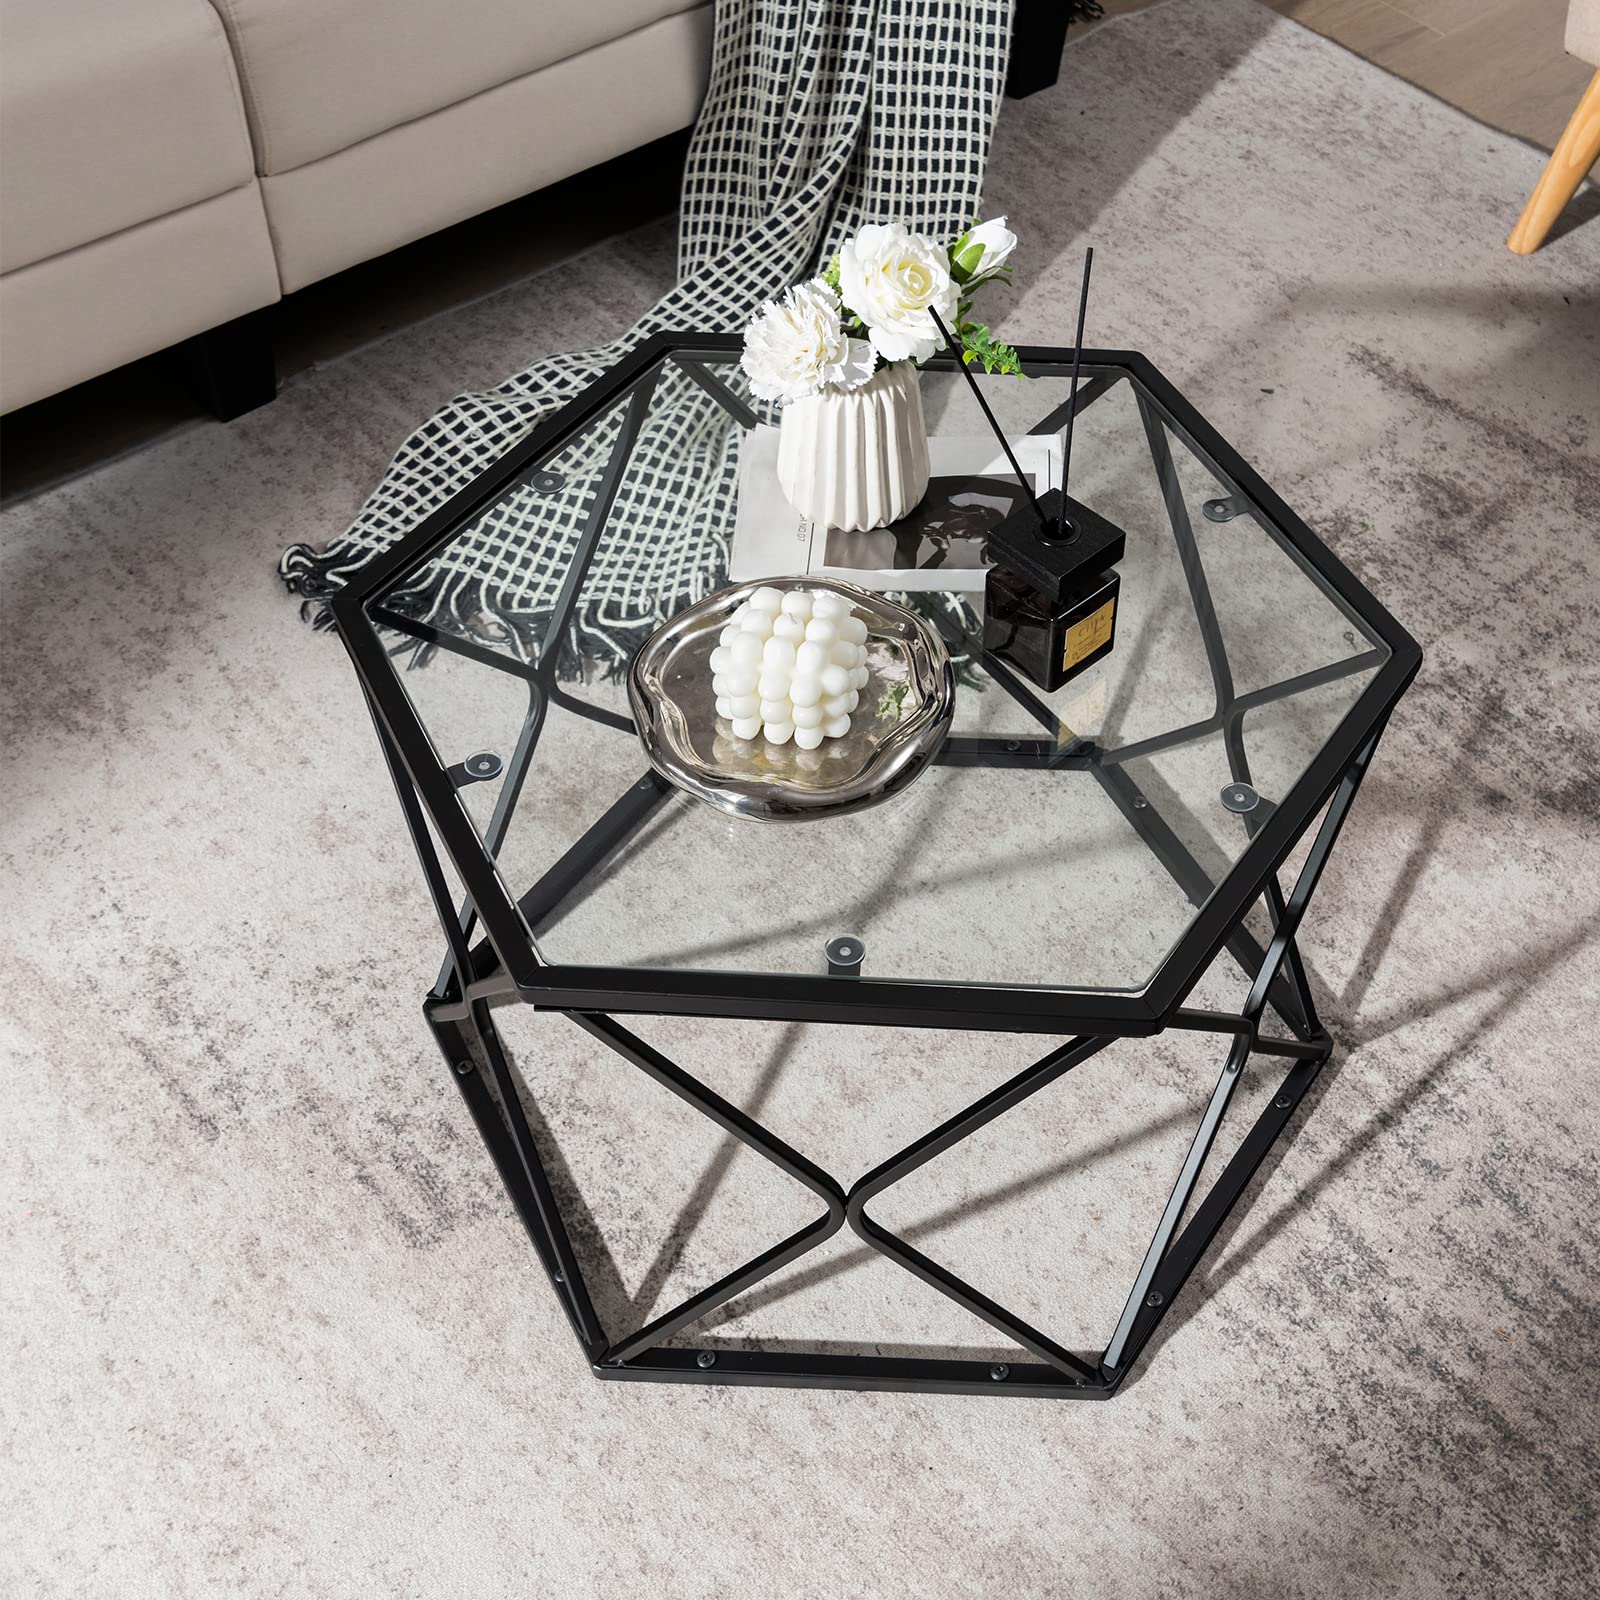 Giantex Hexagonal Glass Coffee Table, End Table w/Tempered Glass Top & Sturdy Metal Legs